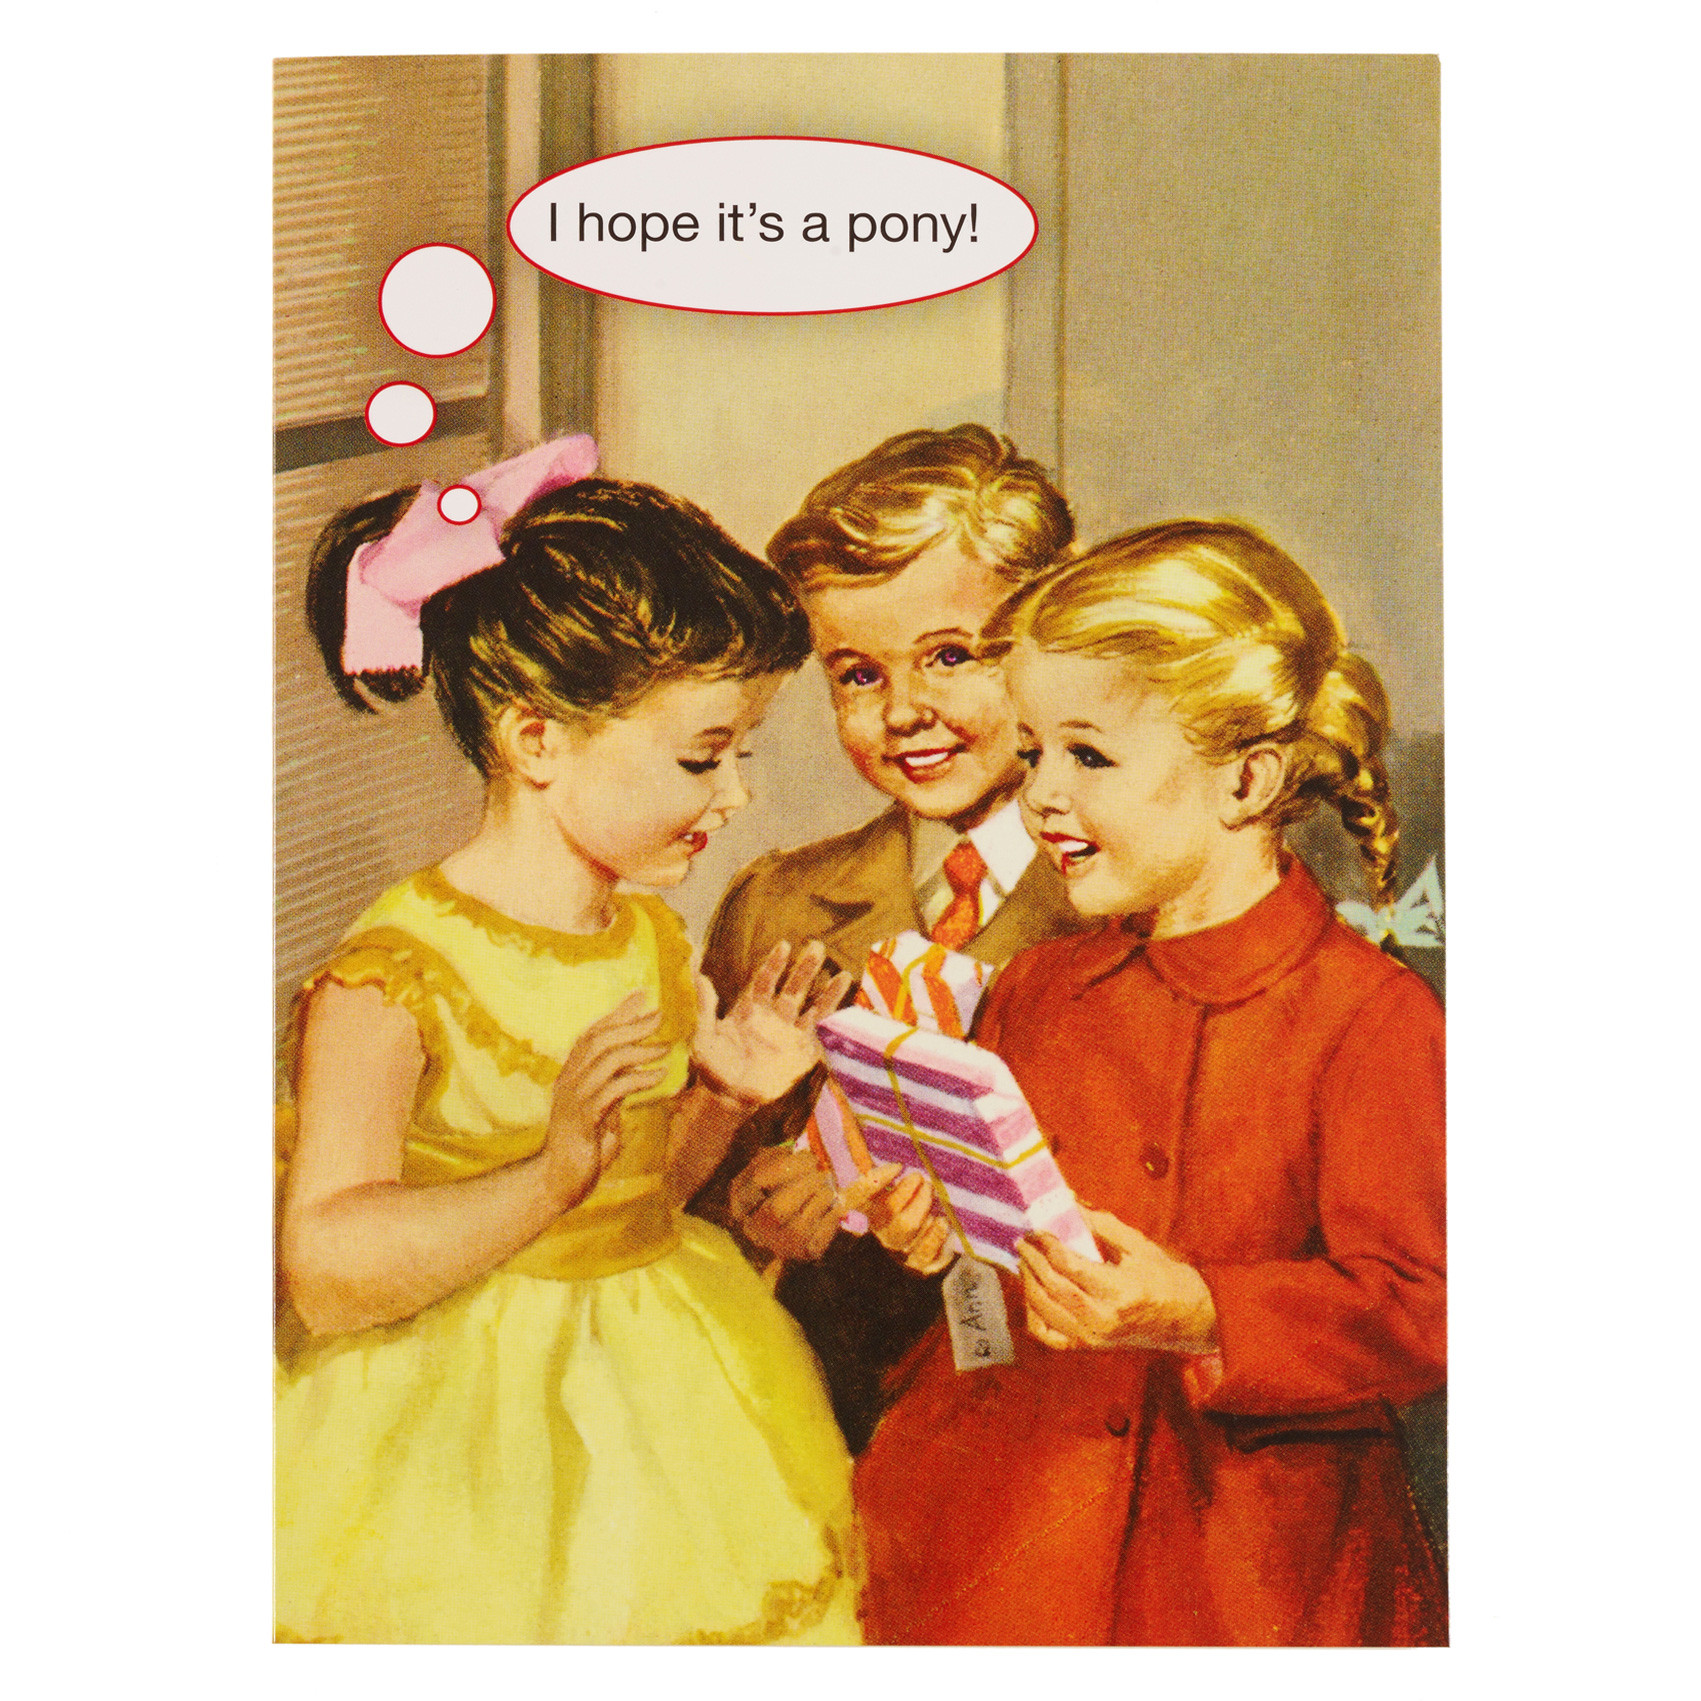 Funny Birthday Gifts For Her
 Humorous Birthday Card Gifts for Her